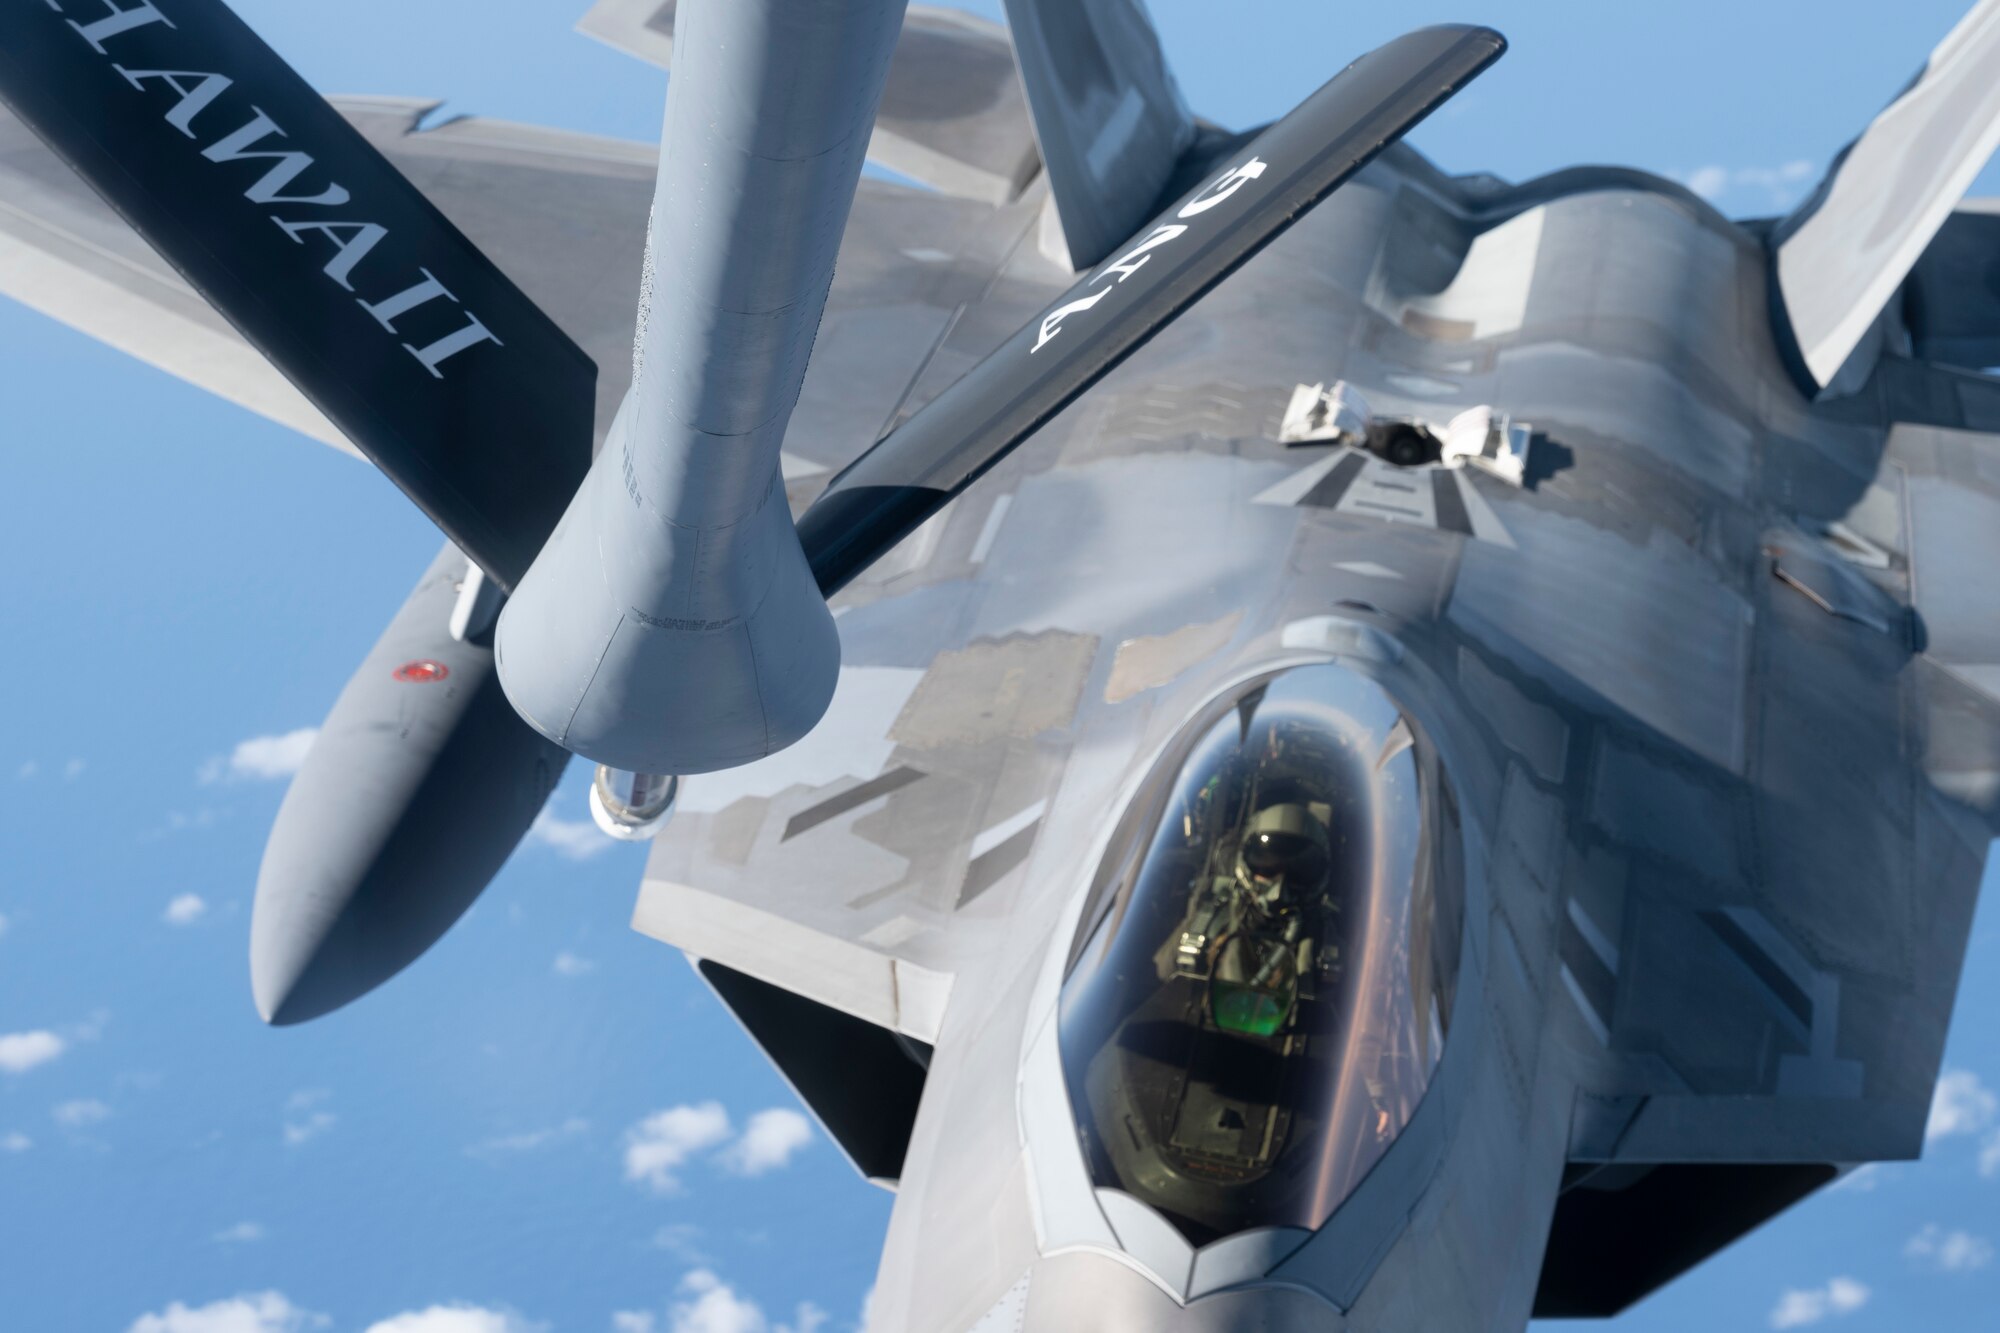 A Hawaii Air National Guard F-22 Raptor receives fuel from a KC-135 Stratotanker from the 203rd Air Refueling Squadron March 10, 2021, near Oahu, Hawaii.